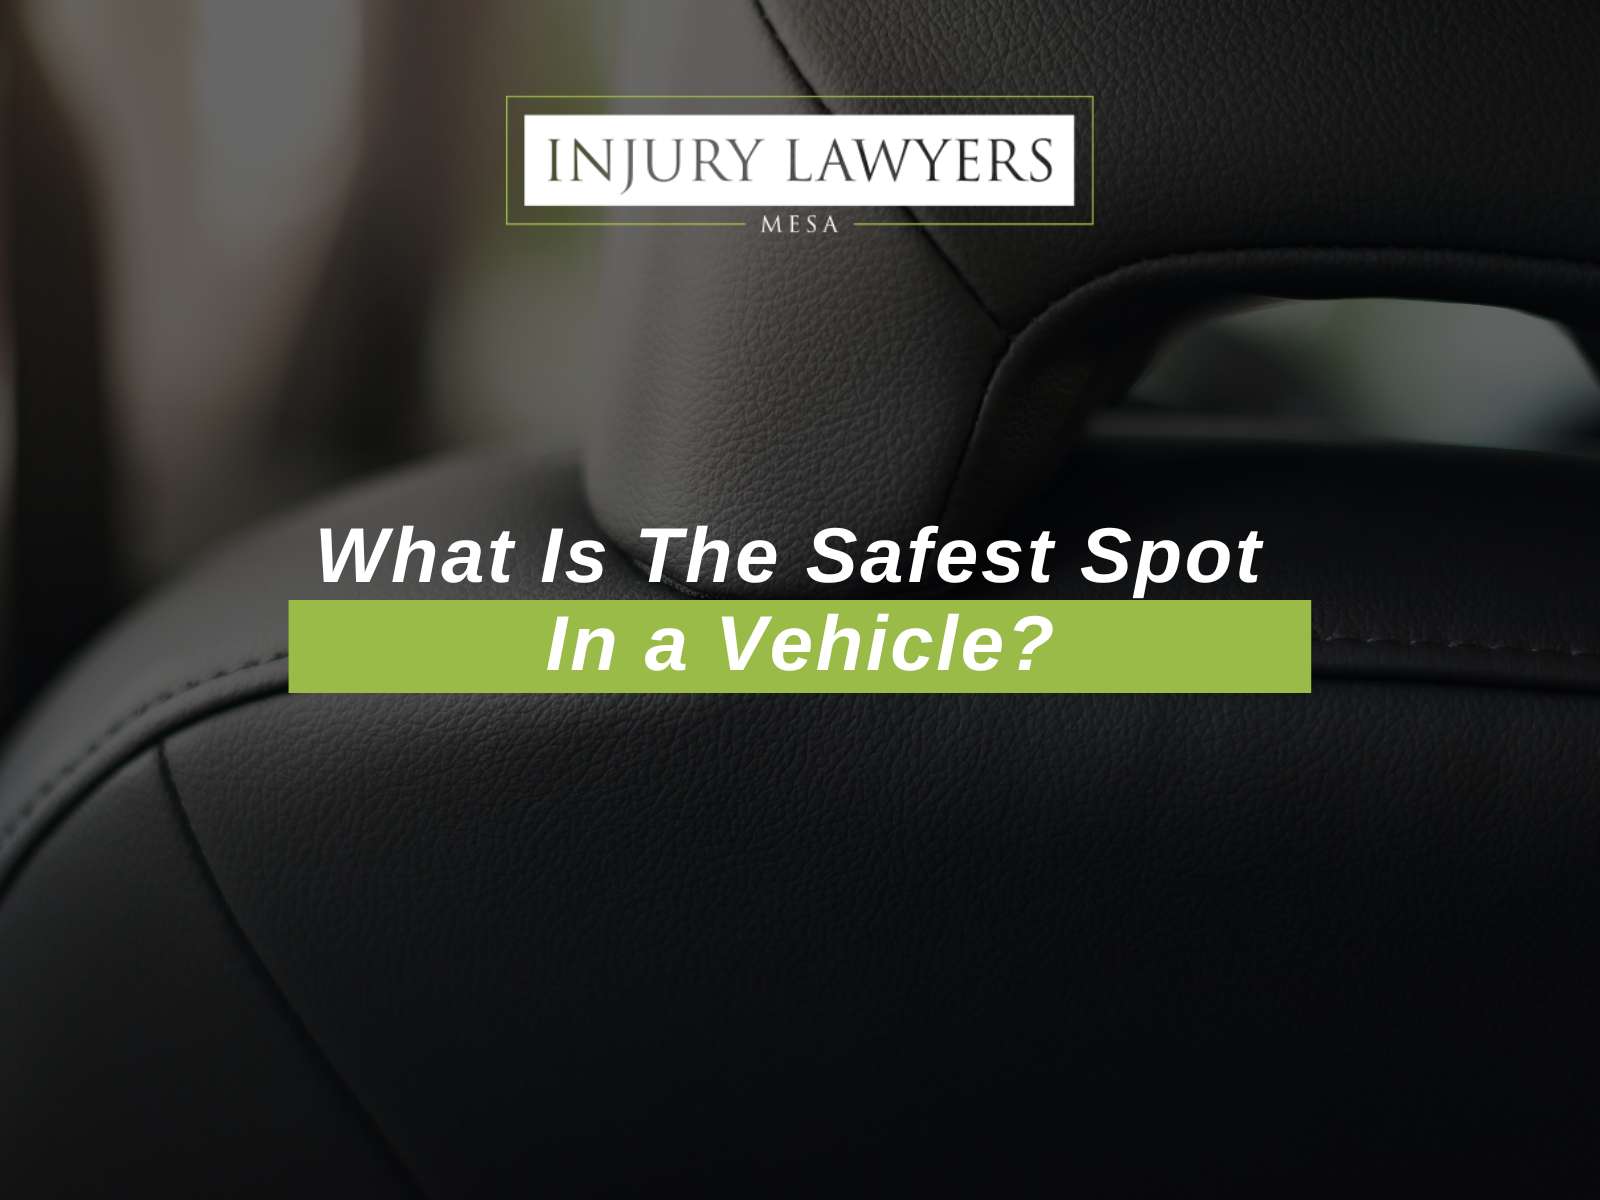 What Is The Safest Spot In a Vehicle?